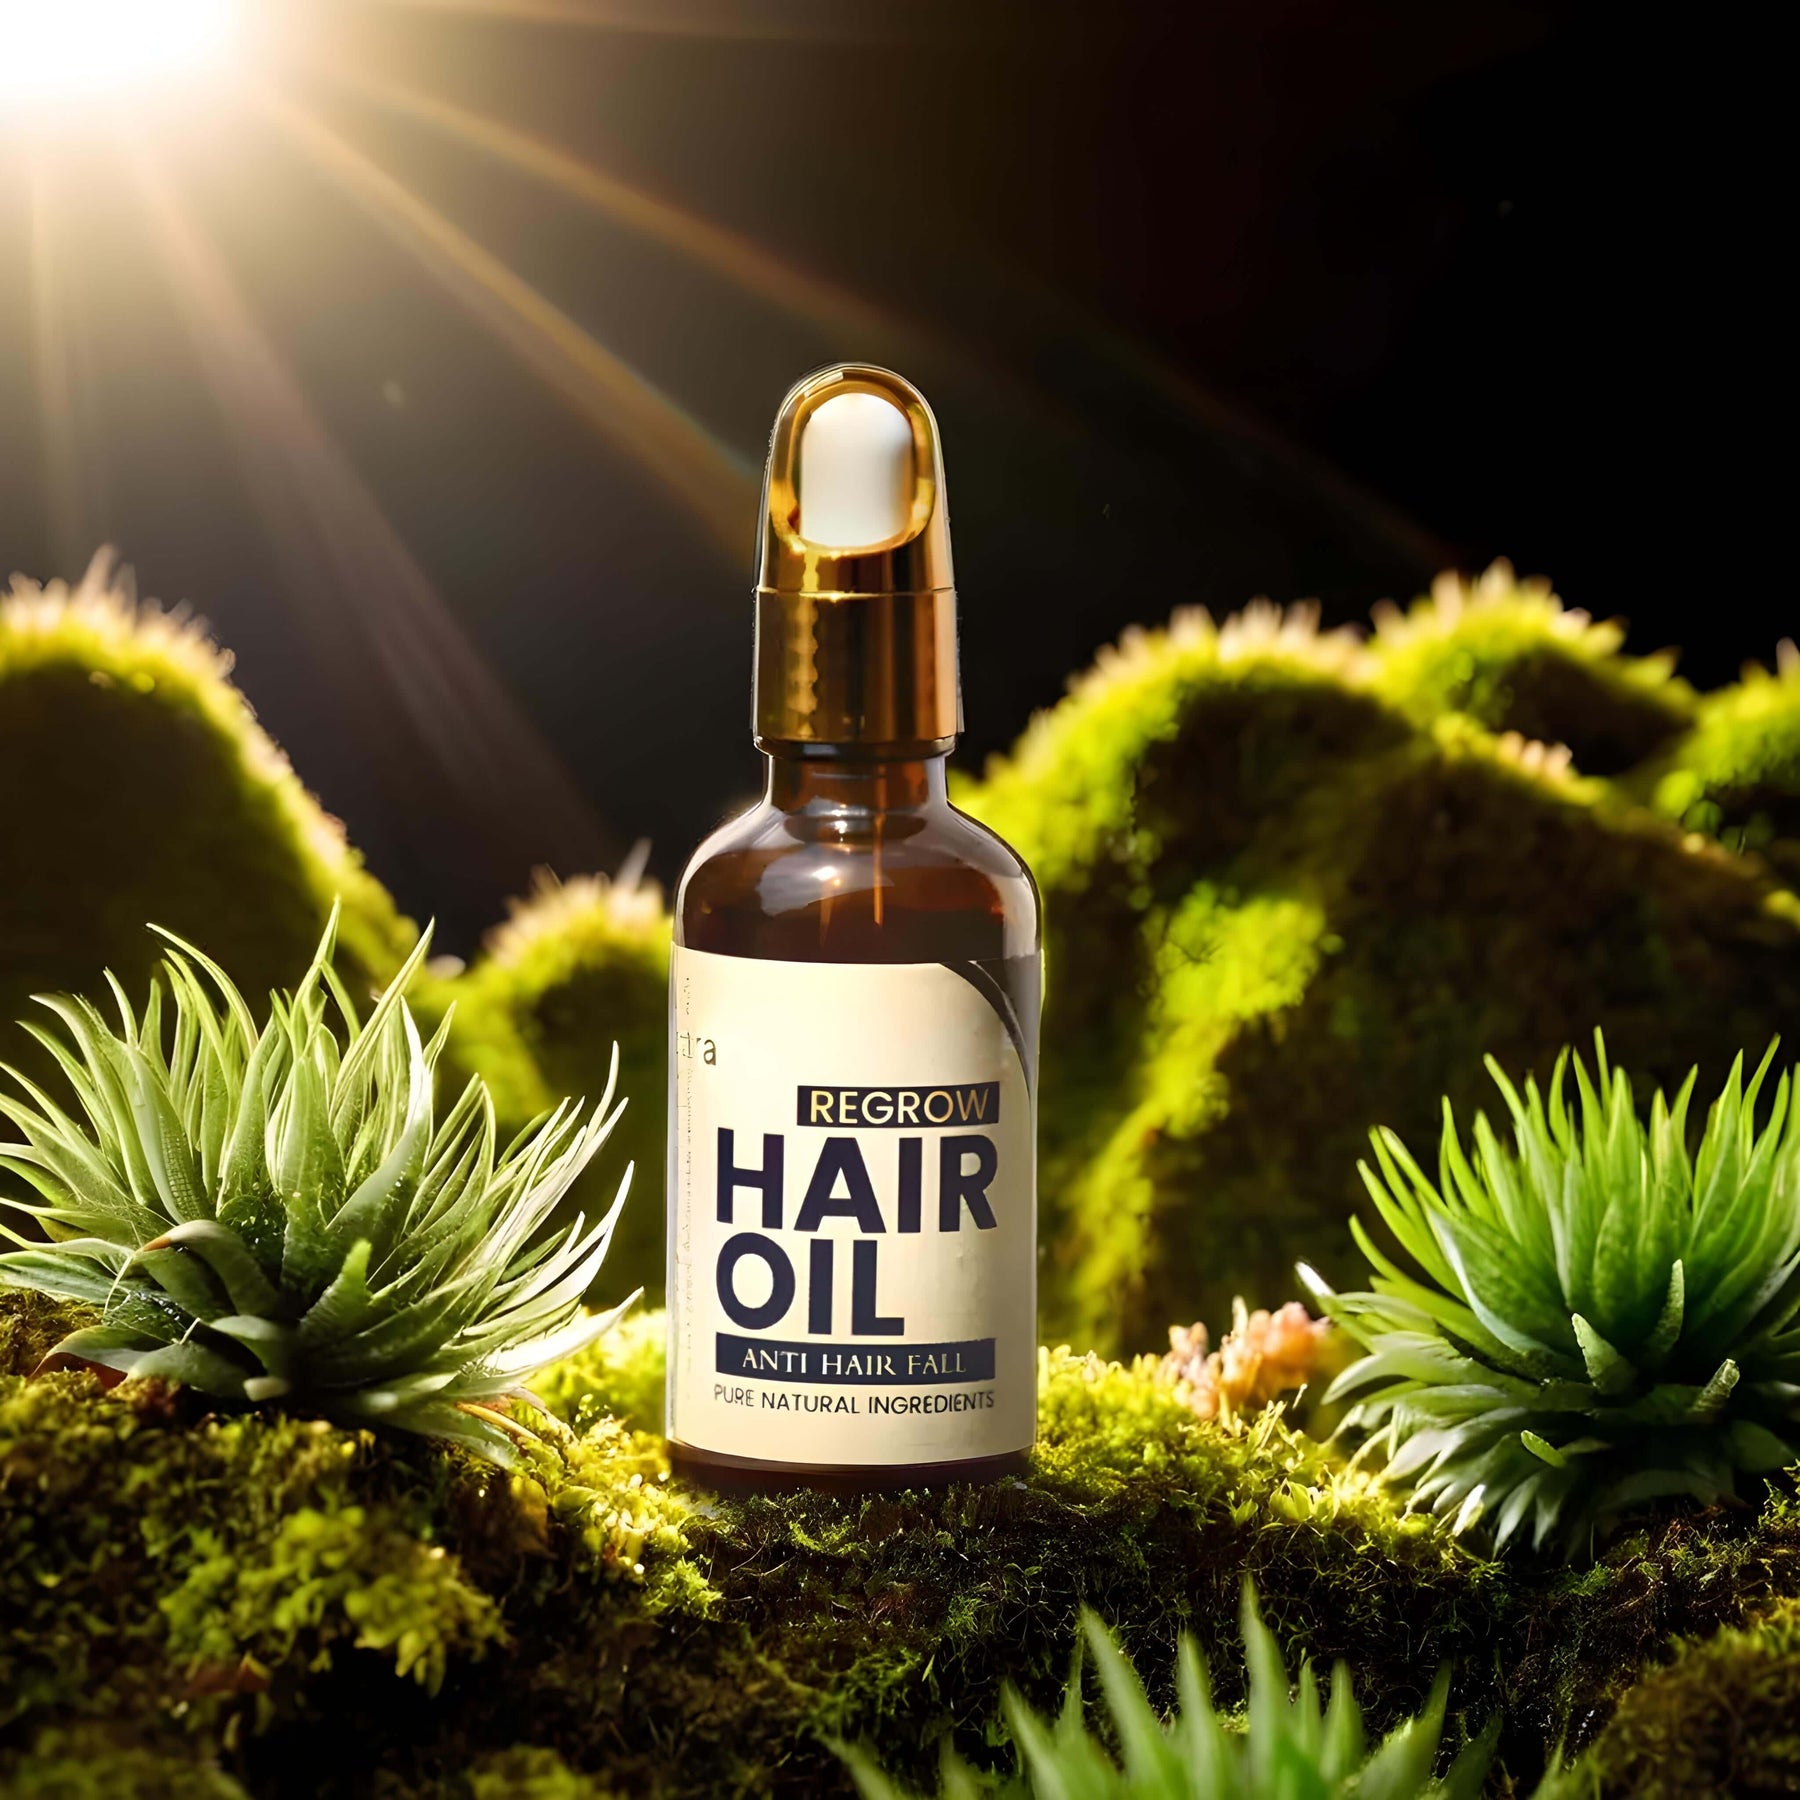 best hair growth oil recommended by doctors In Pakistan - Silkaura